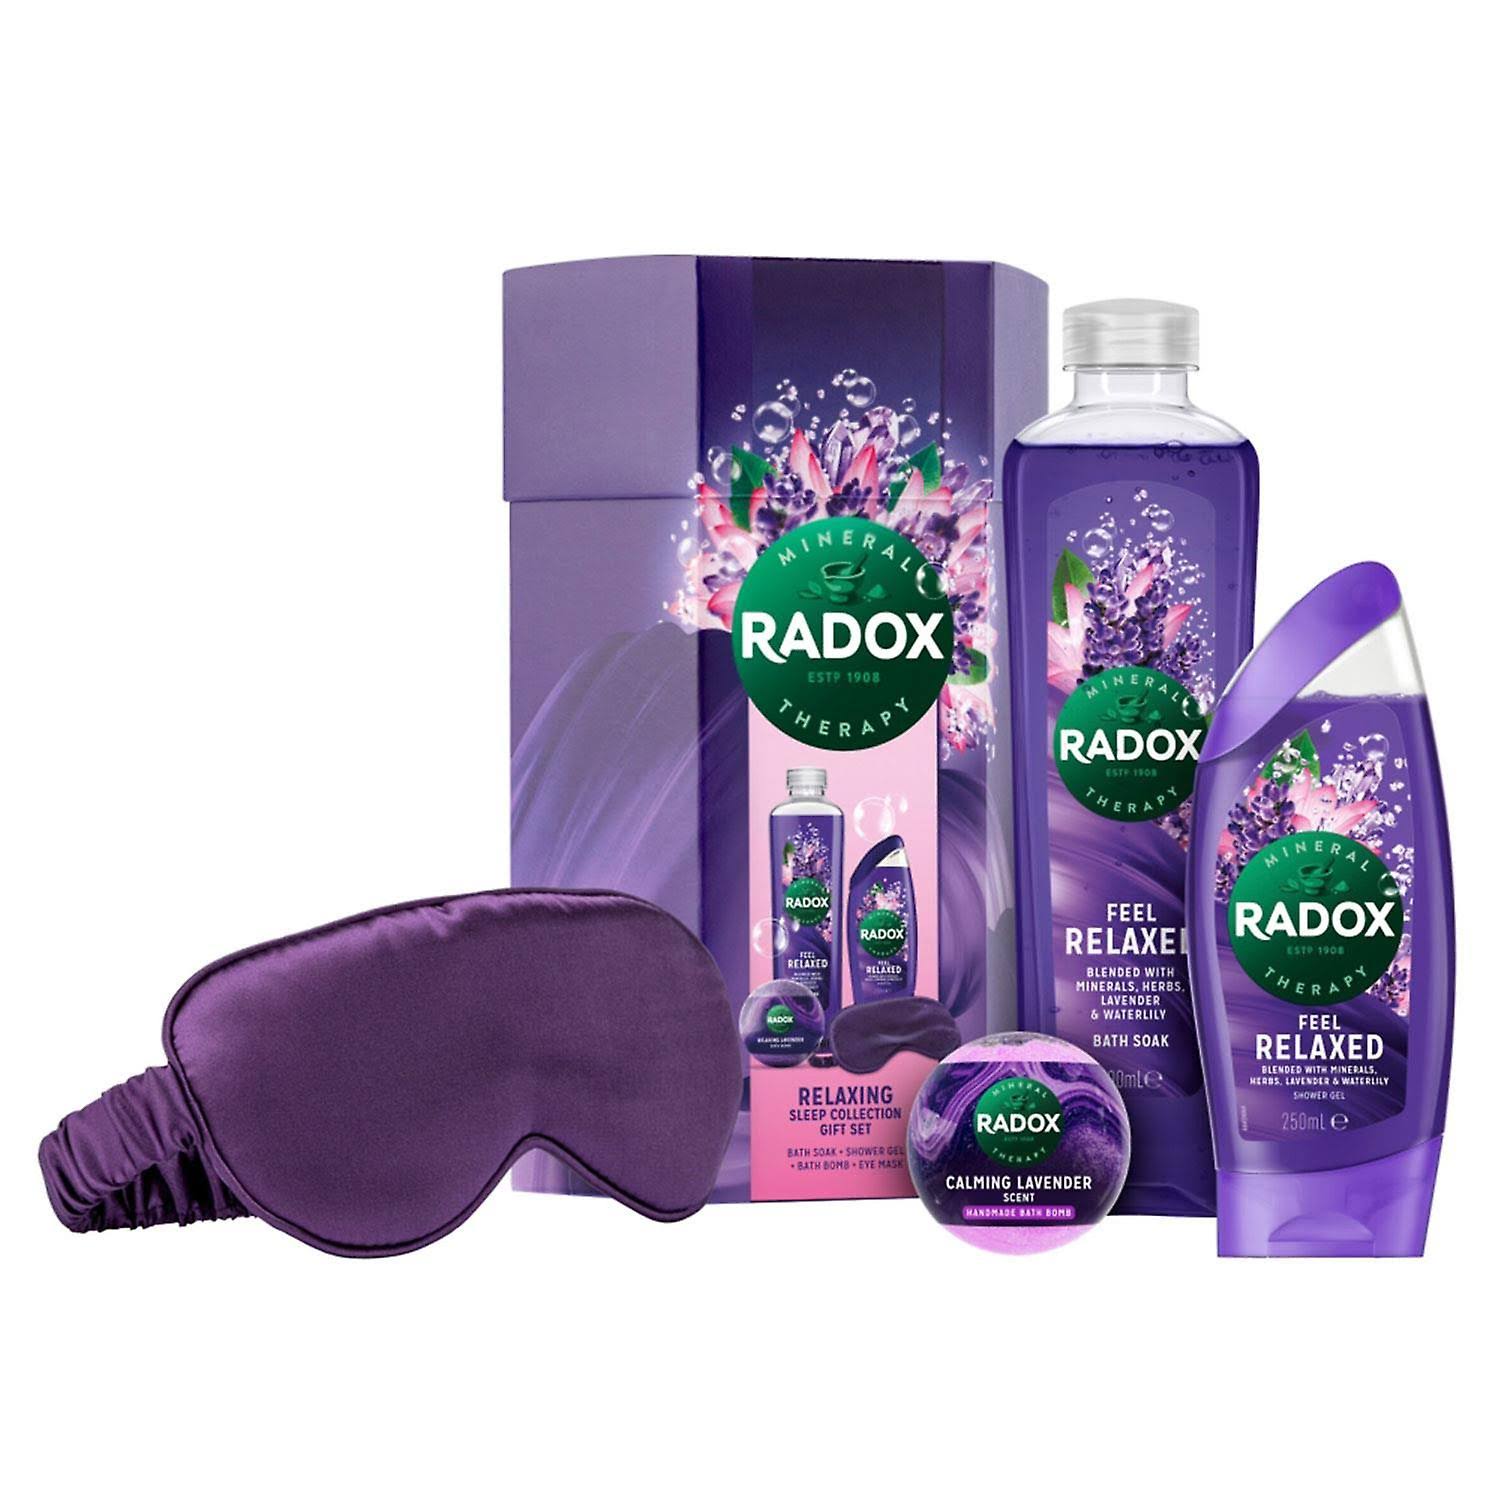 Radox Relaxing Sleep Collection Gift Set